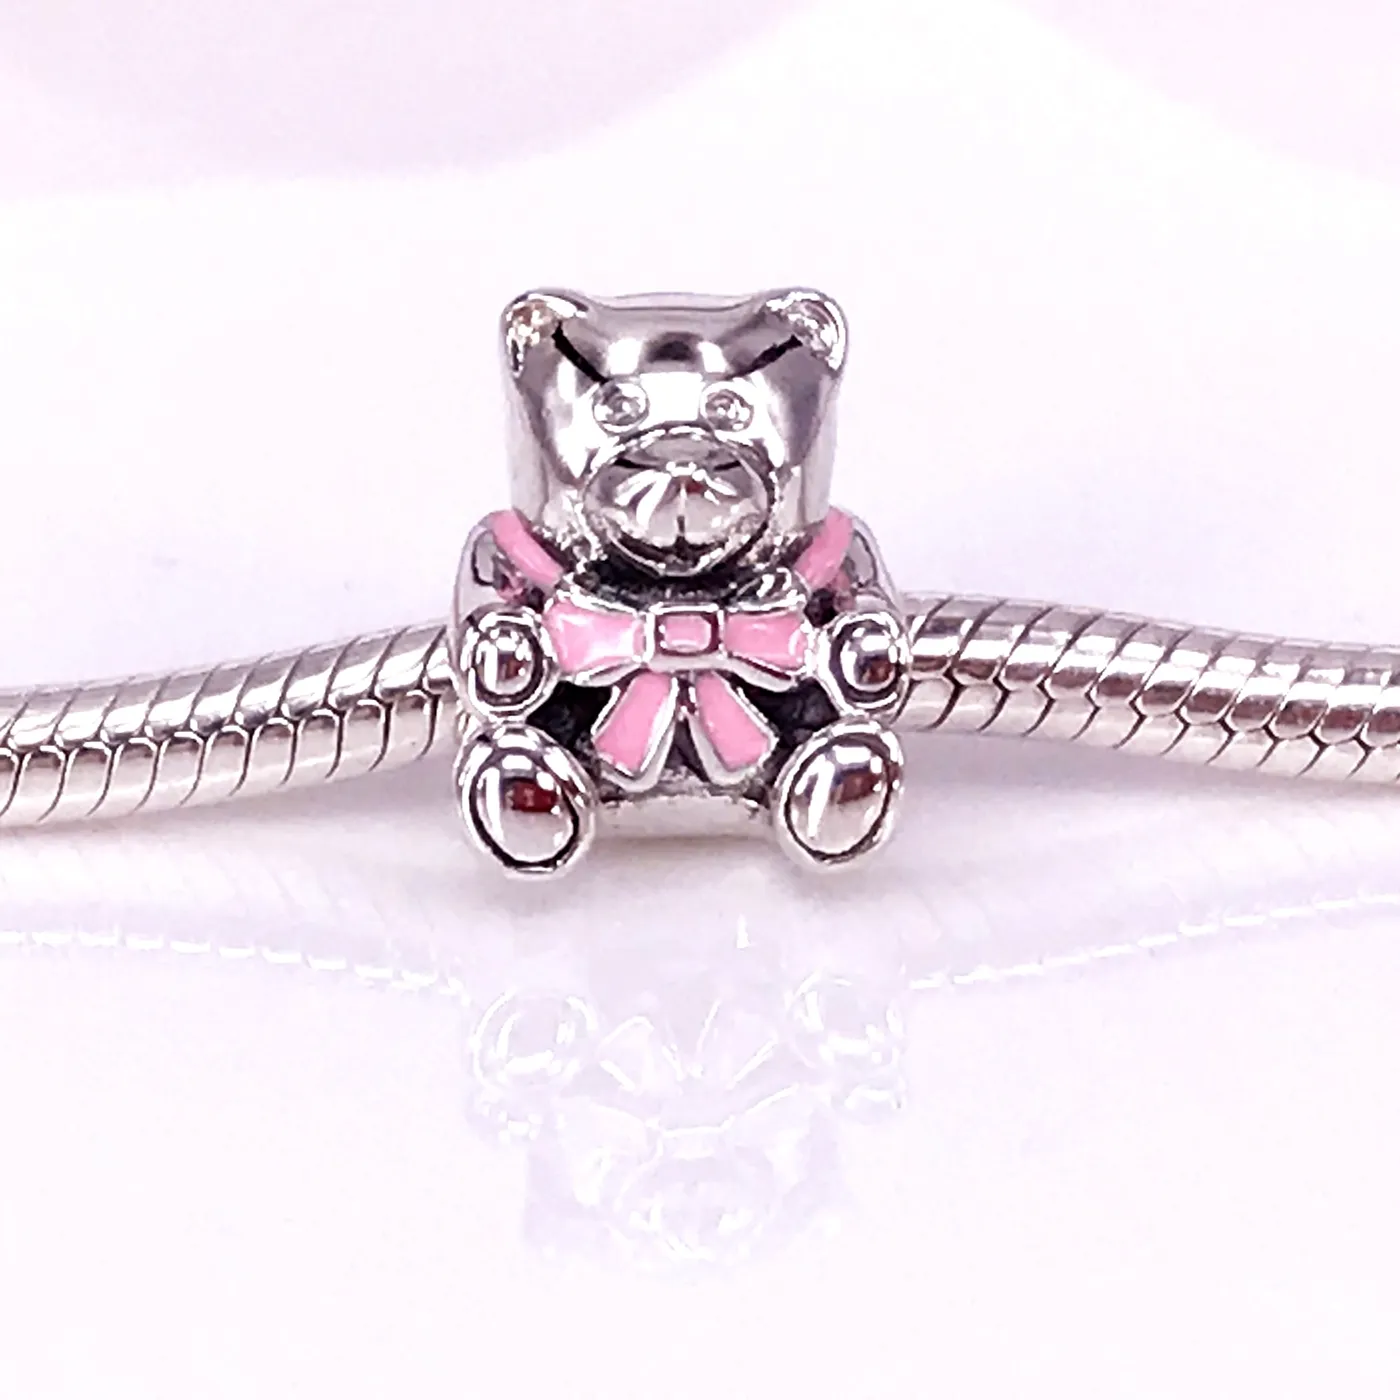  Pandora Sparkling Cerise Pink Charm Bracelet Charm Moments  Bracelets - Stunning Women's Jewelry - Gift for Women - Made with Sterling  Silver & Cubic Zirconia: Clothing, Shoes & Jewelry